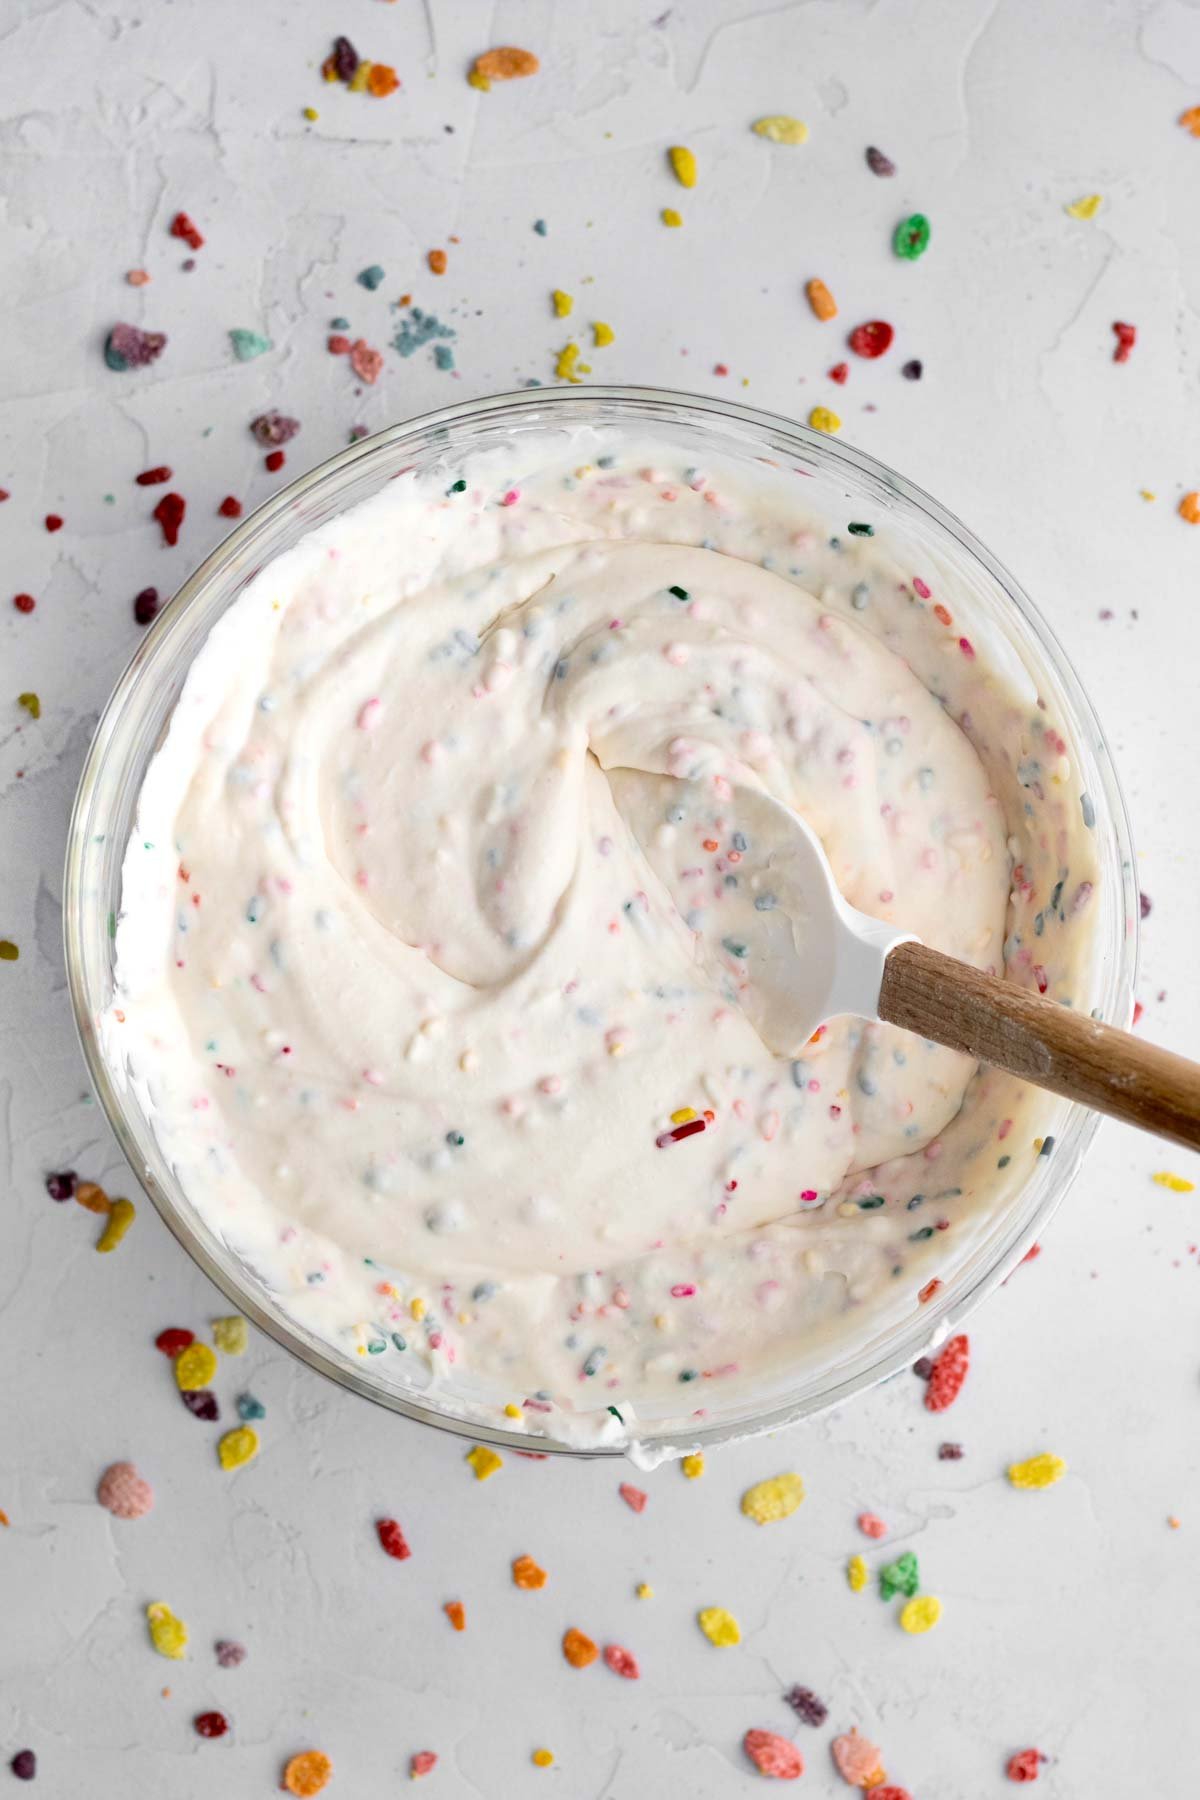 Mixing the sprinkles thouroughly.